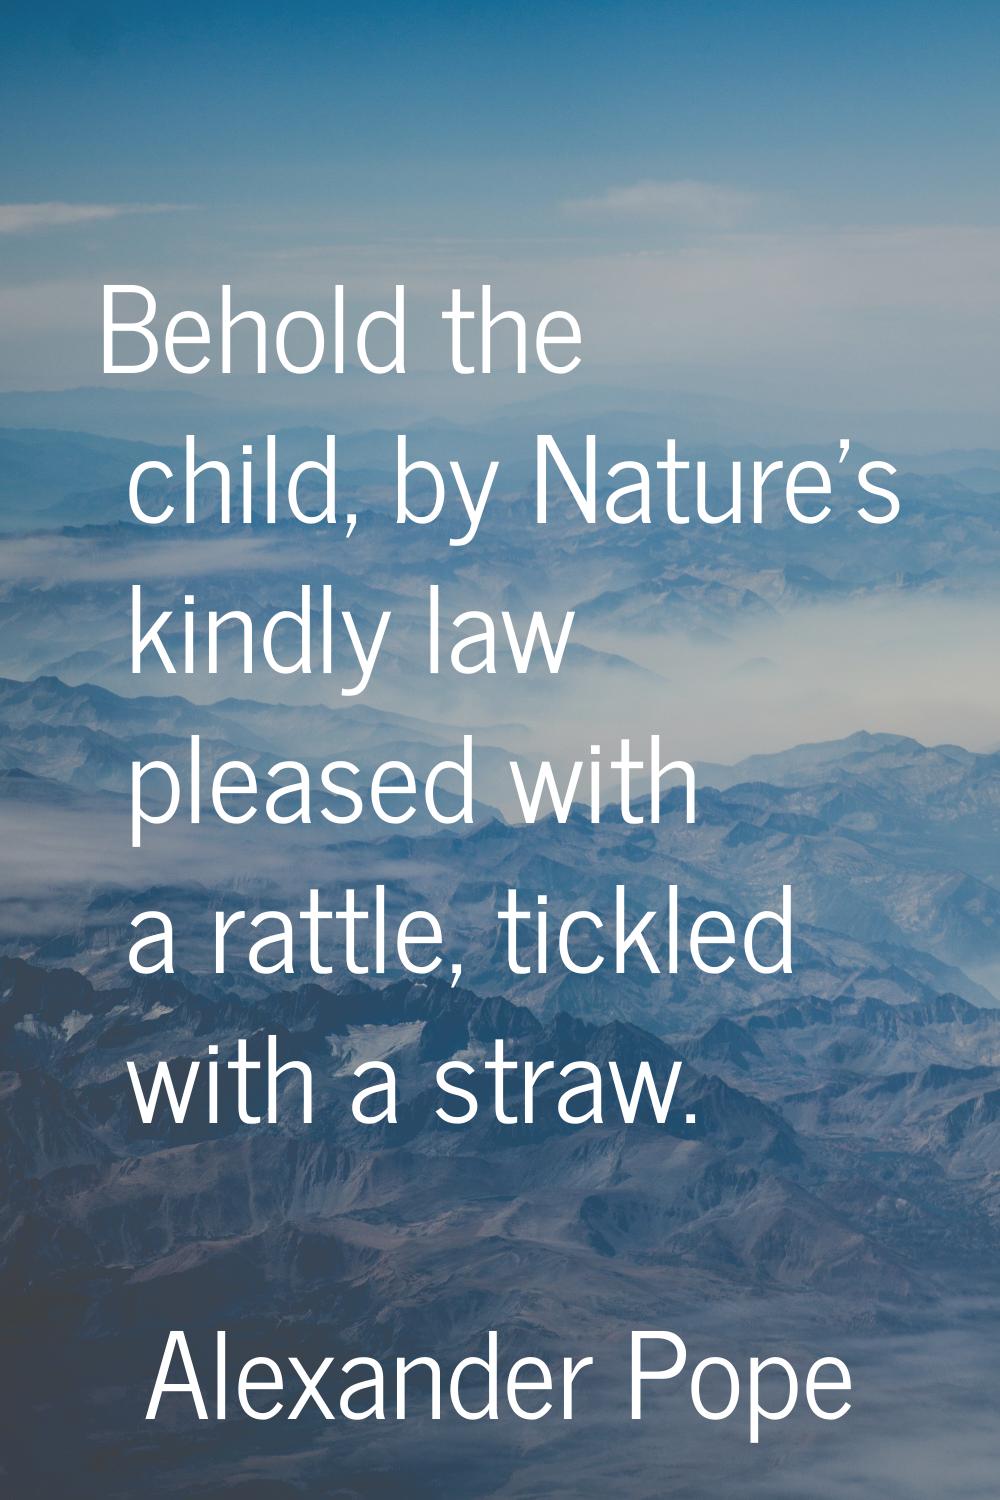 Behold the child, by Nature's kindly law pleased with a rattle, tickled with a straw.